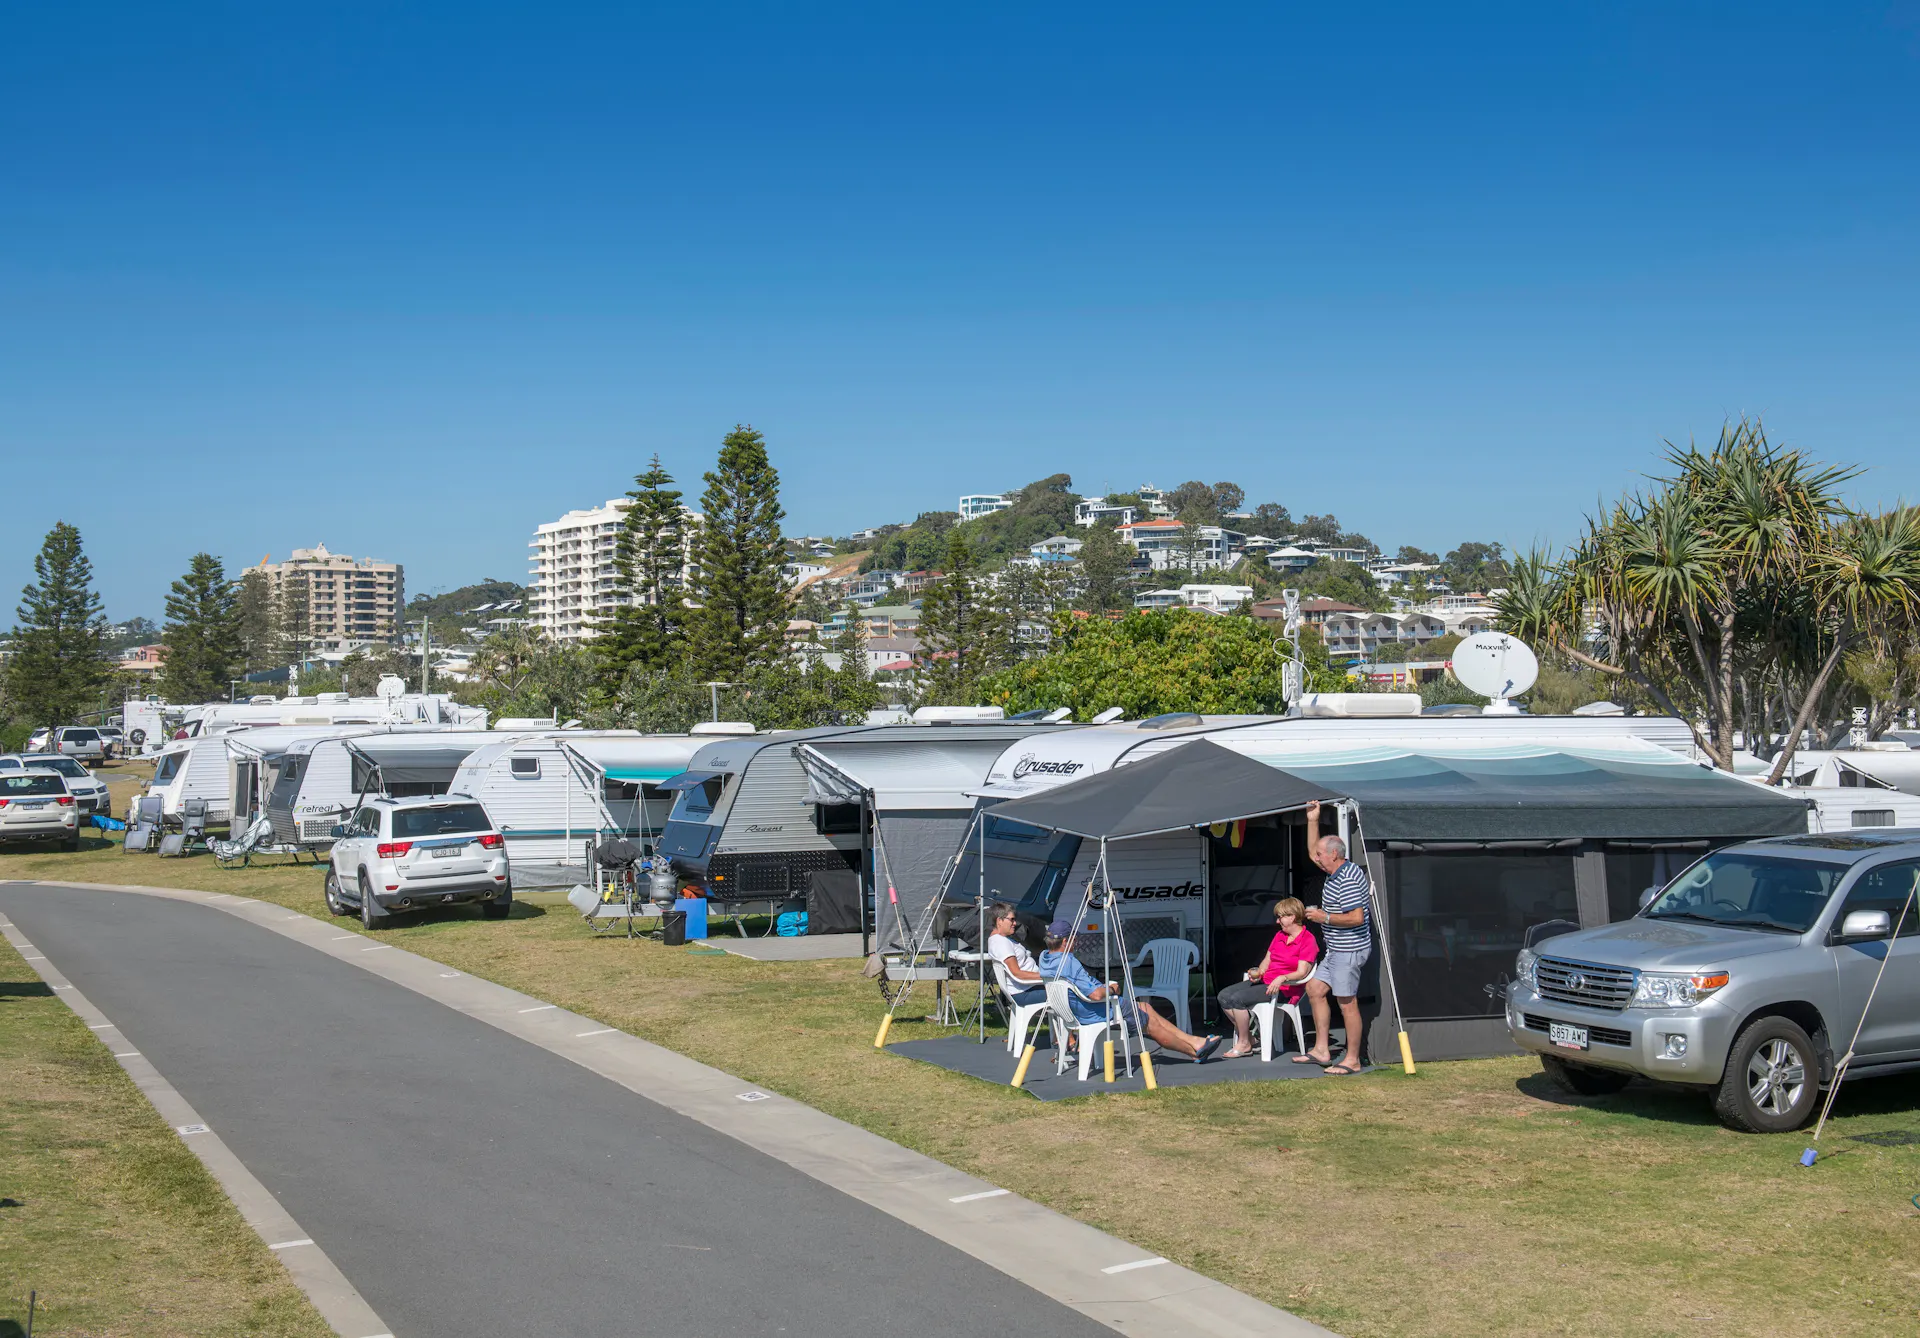 Image of a Coolum Beach Caravan site with people sitting under their awning